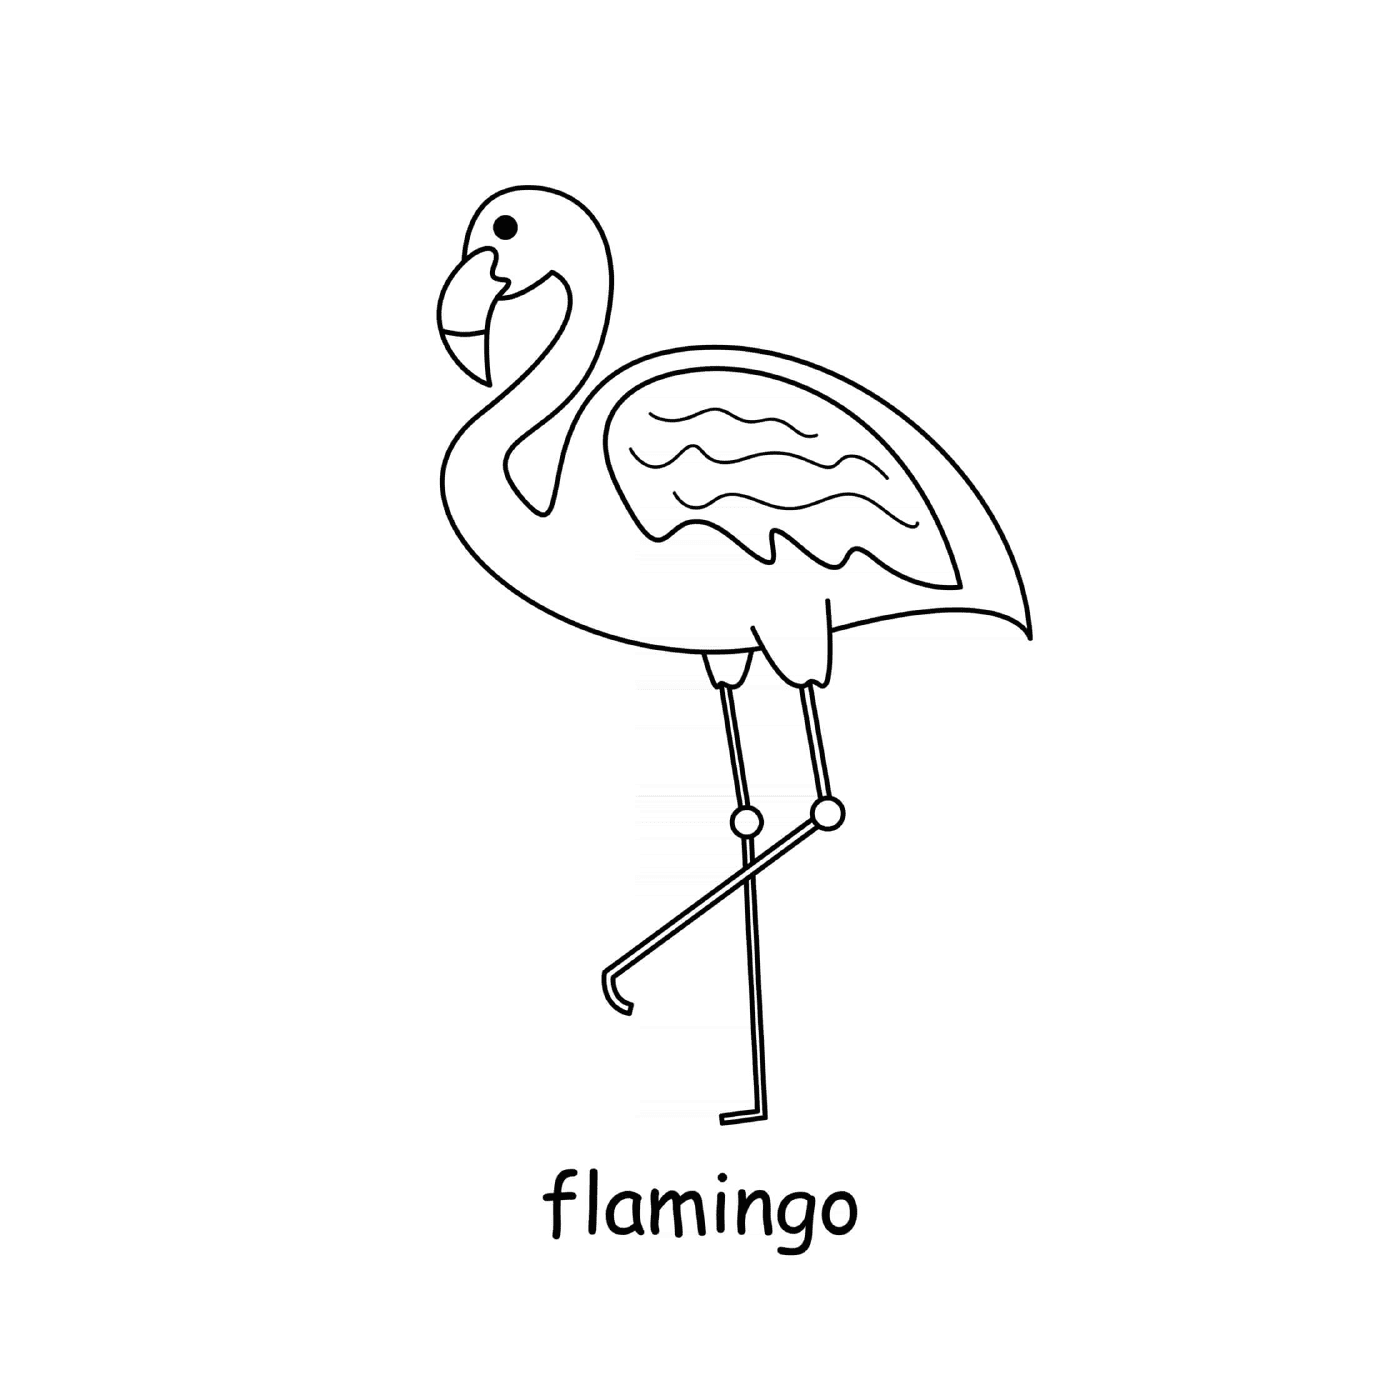  FlamingoCity name (optional, probably does not need a translation) 